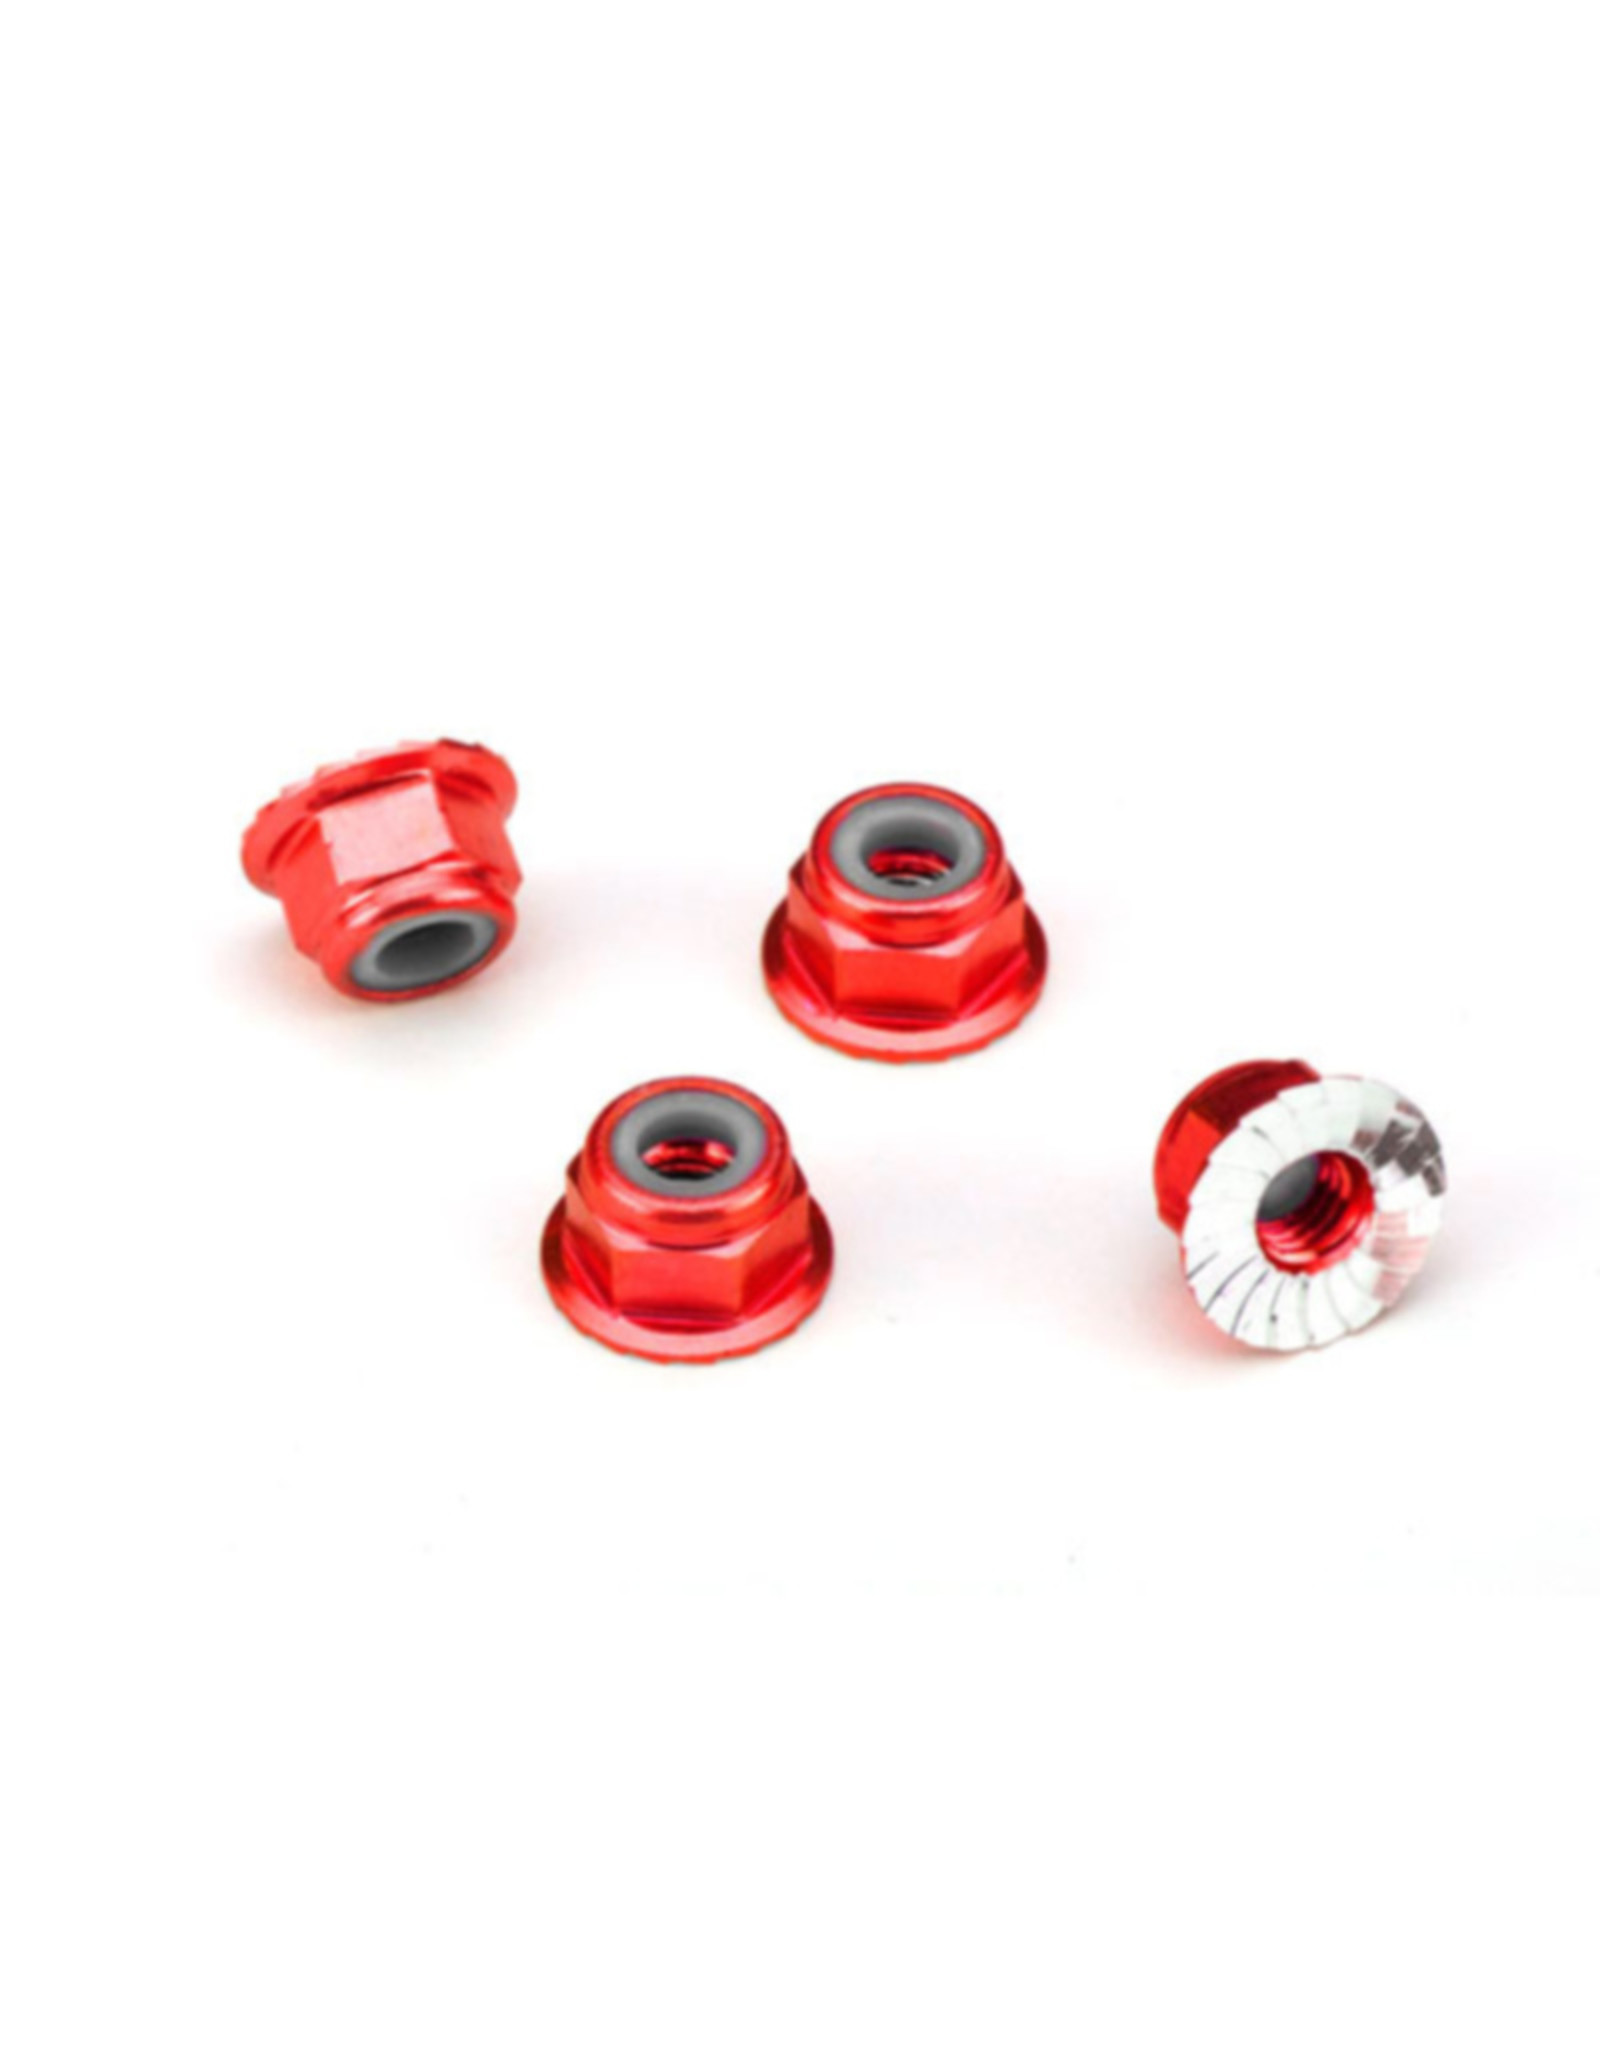 Traxxas TRA1747A NUTS 4MM FLANGED LOCK RED (4)